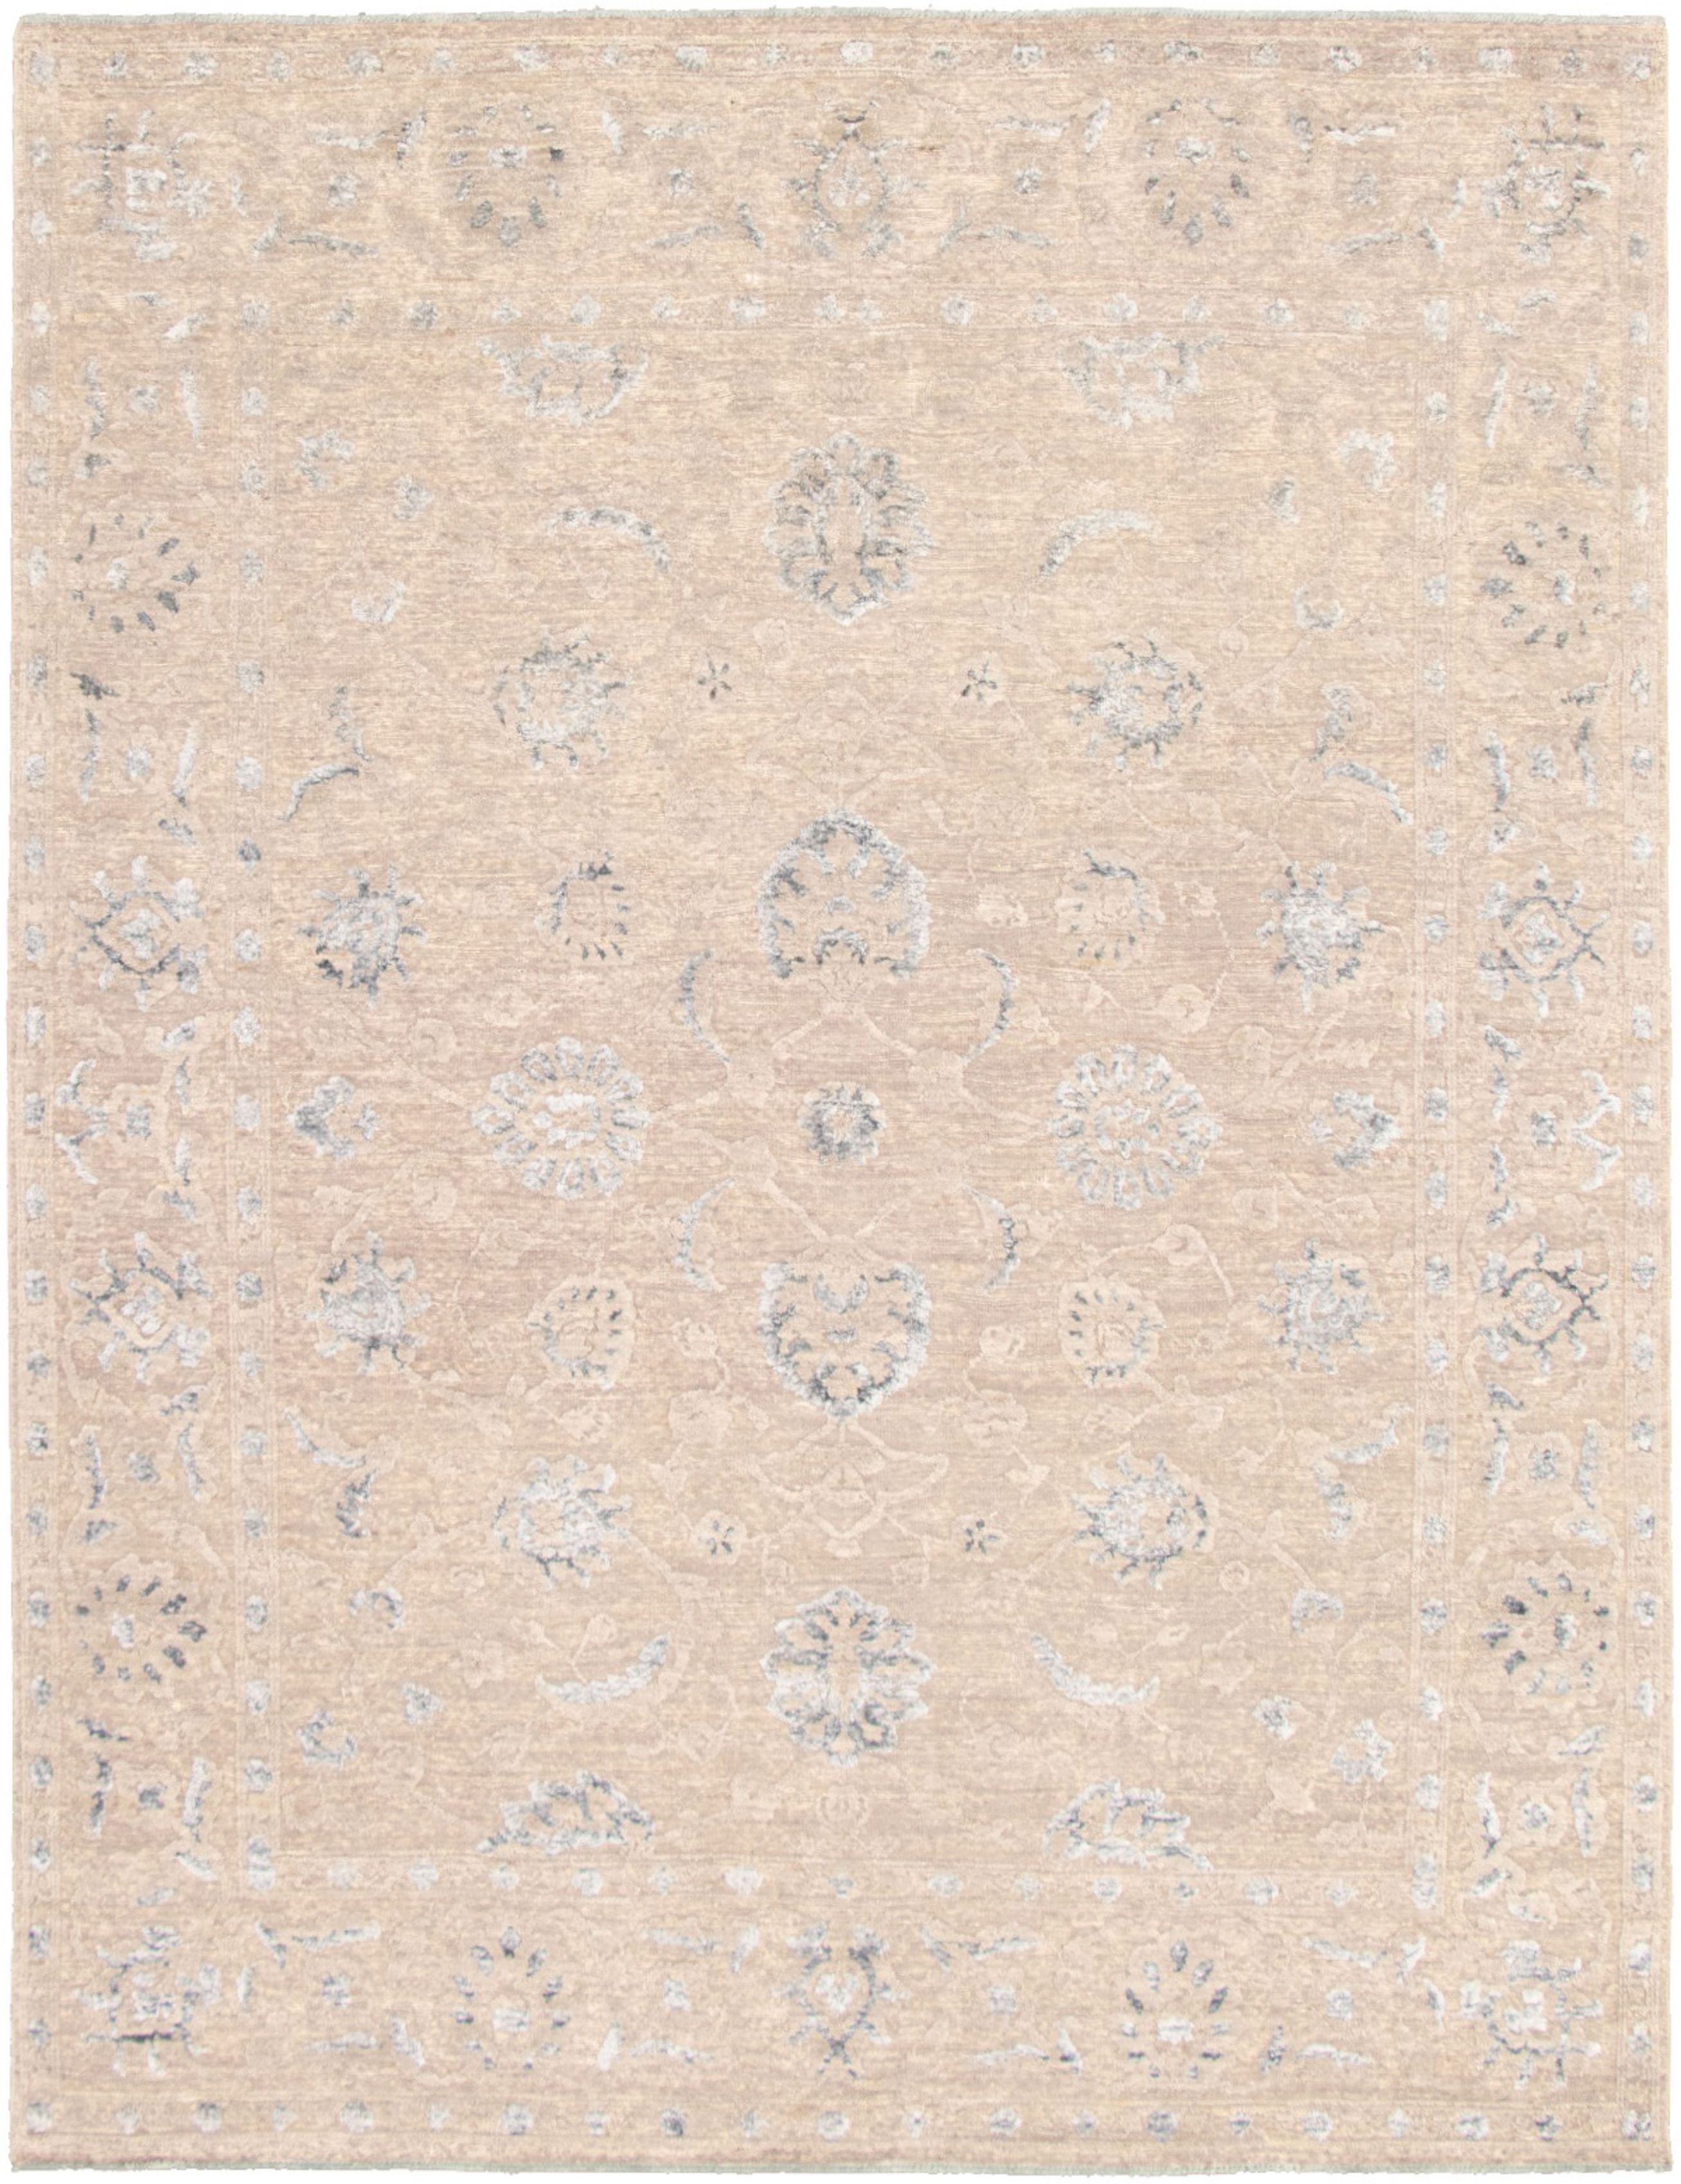 Hand-knotted Signature Collection Grey Wool/Silk Rug 7'10" x 10'2" Size: 7'10" x 10'2"  